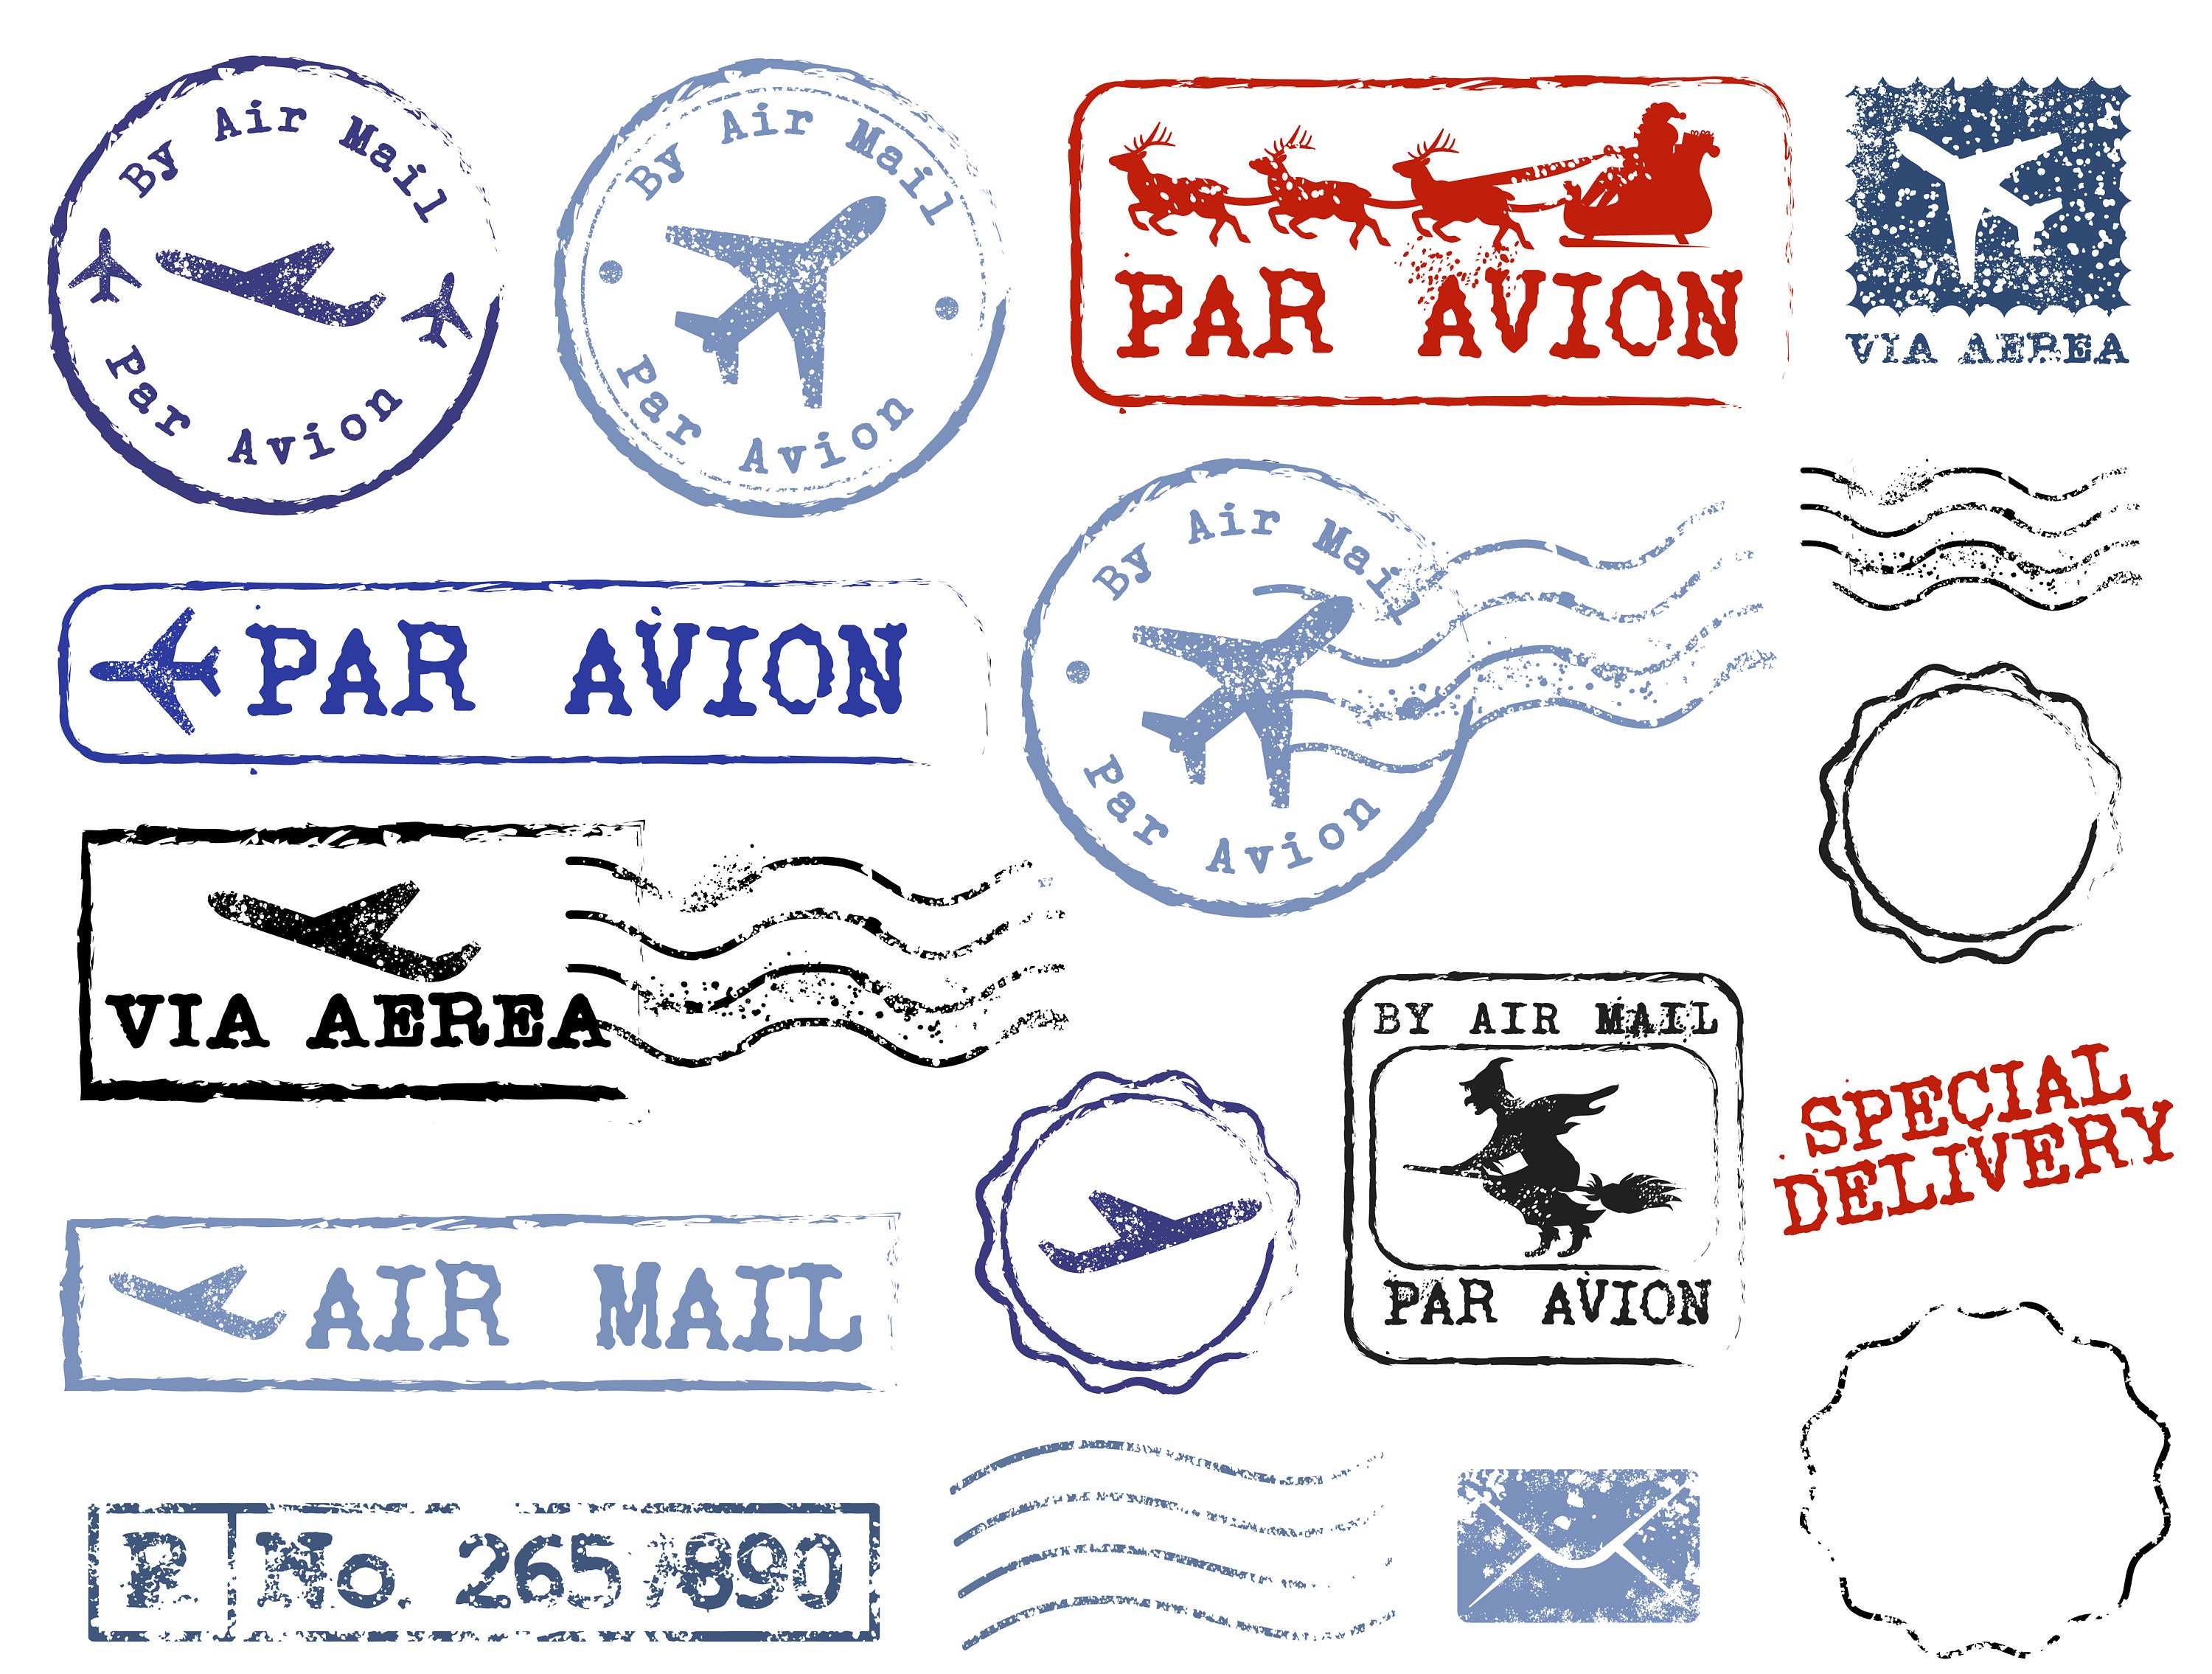 60 Travel Stamp Sticker Set for Journaling, Diary and Scrapbooking  Decoration 